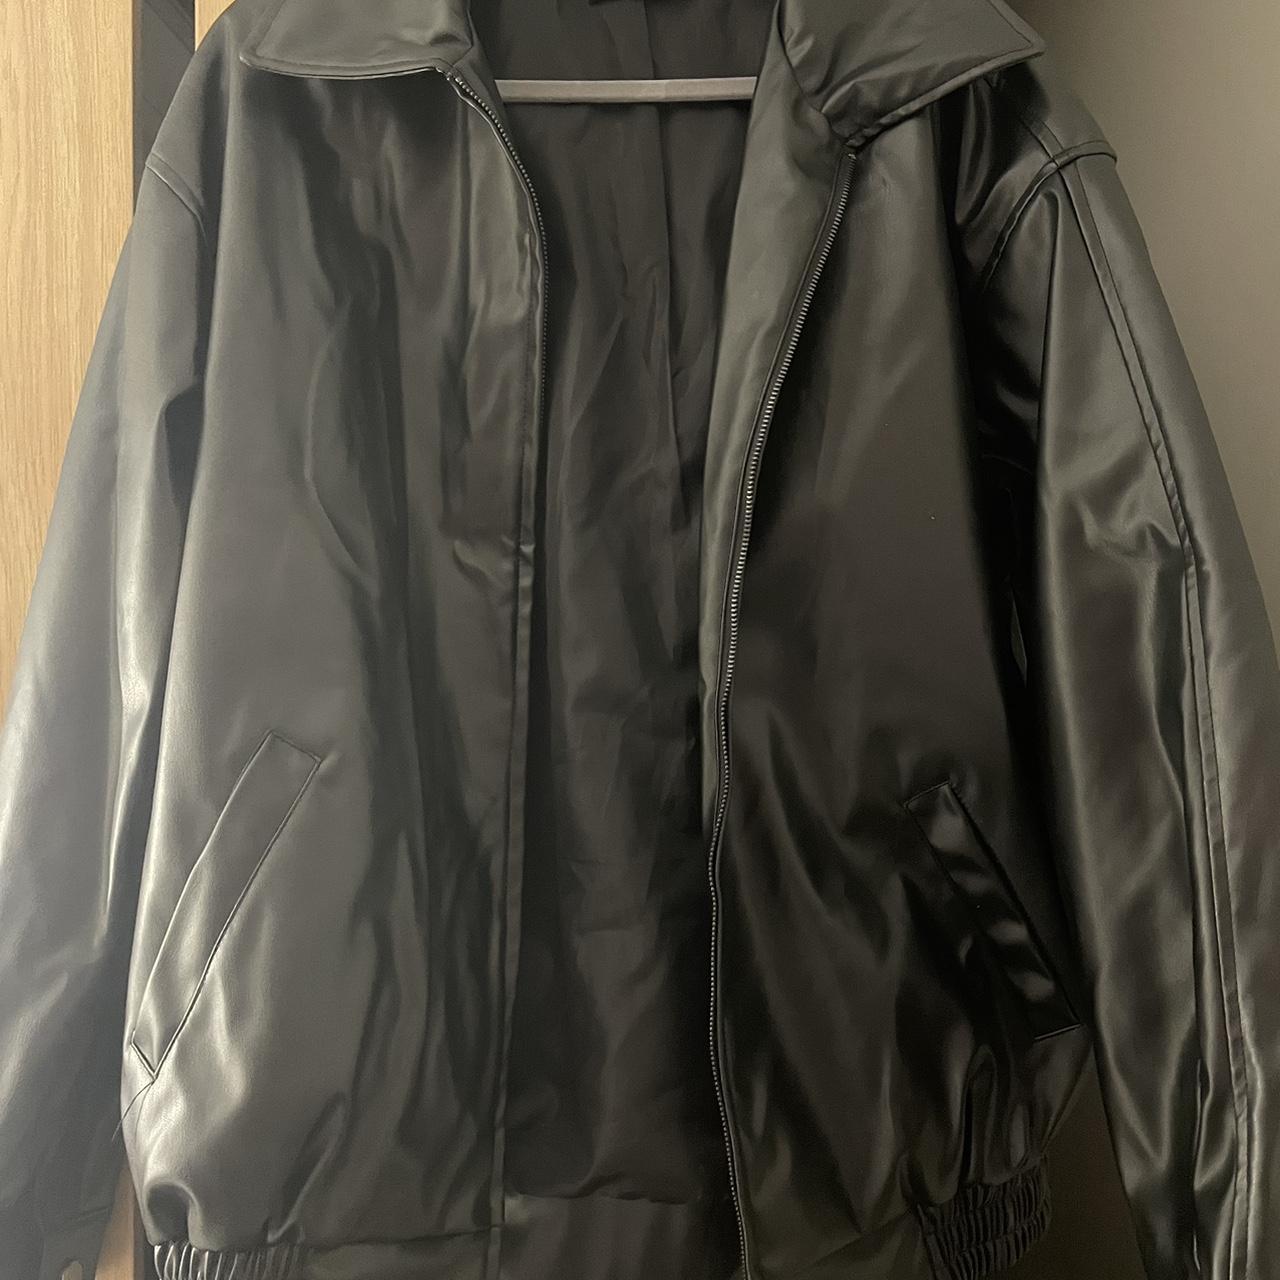 Black leather bomber jacket Great condition Only... - Depop